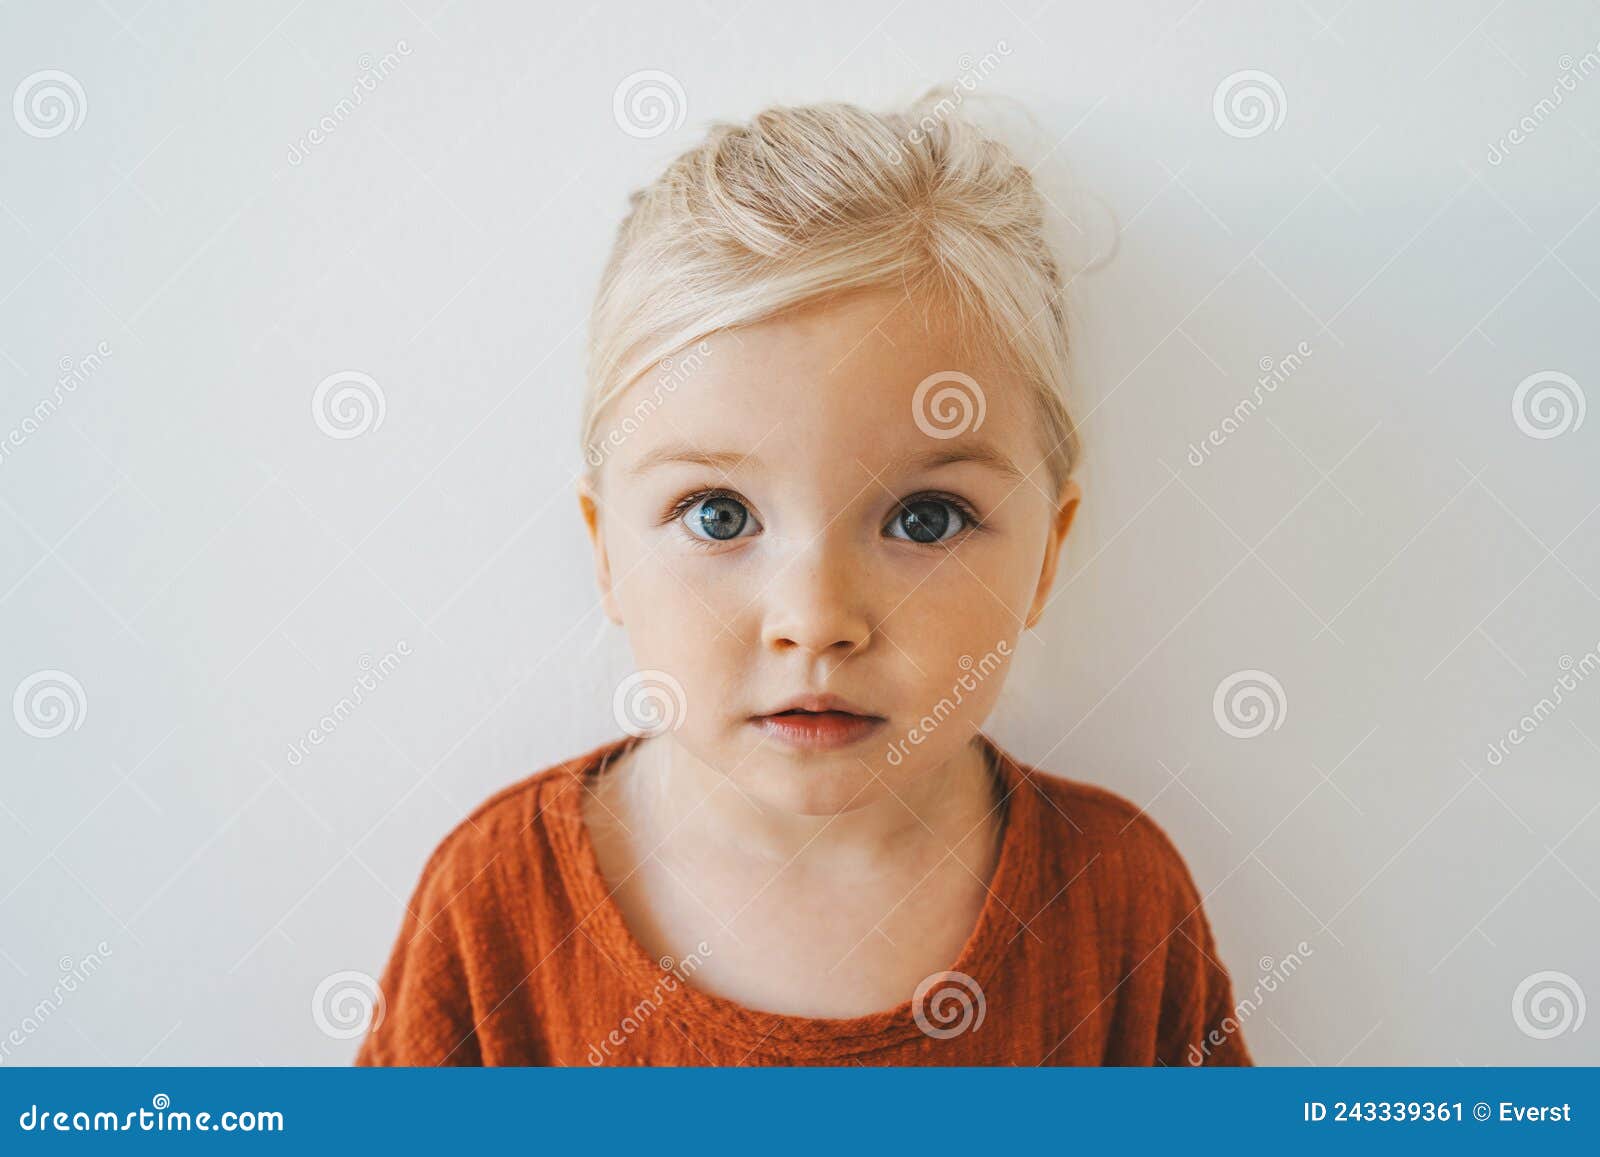 2. Cute Blonde Hair Toddler Boy Playing with Toys - wide 1